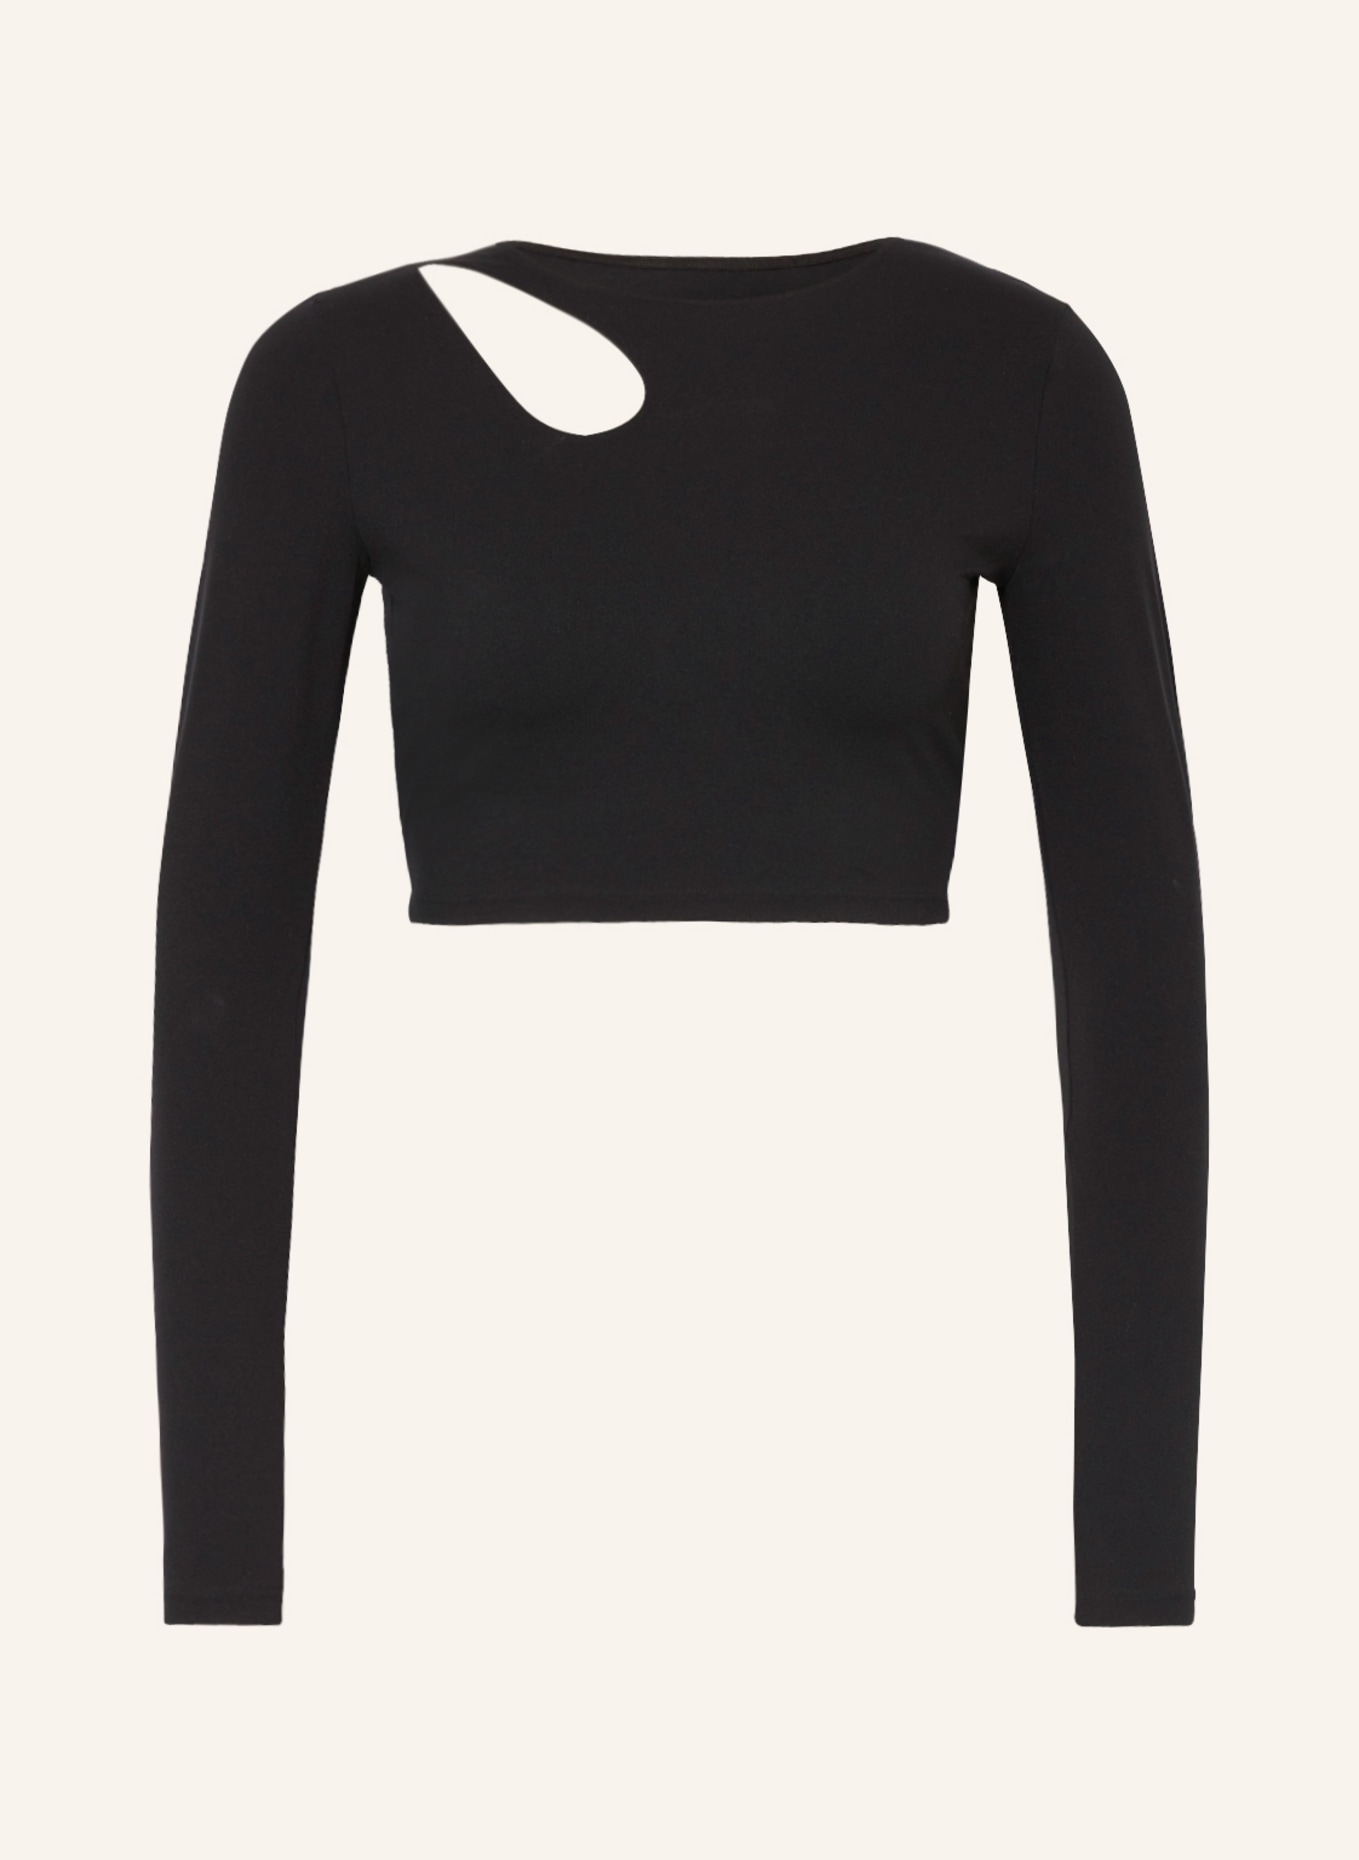 Wolford Cropped-Longsleeve mit Cut-out, Farbe: SCHWARZ (Bild 1)